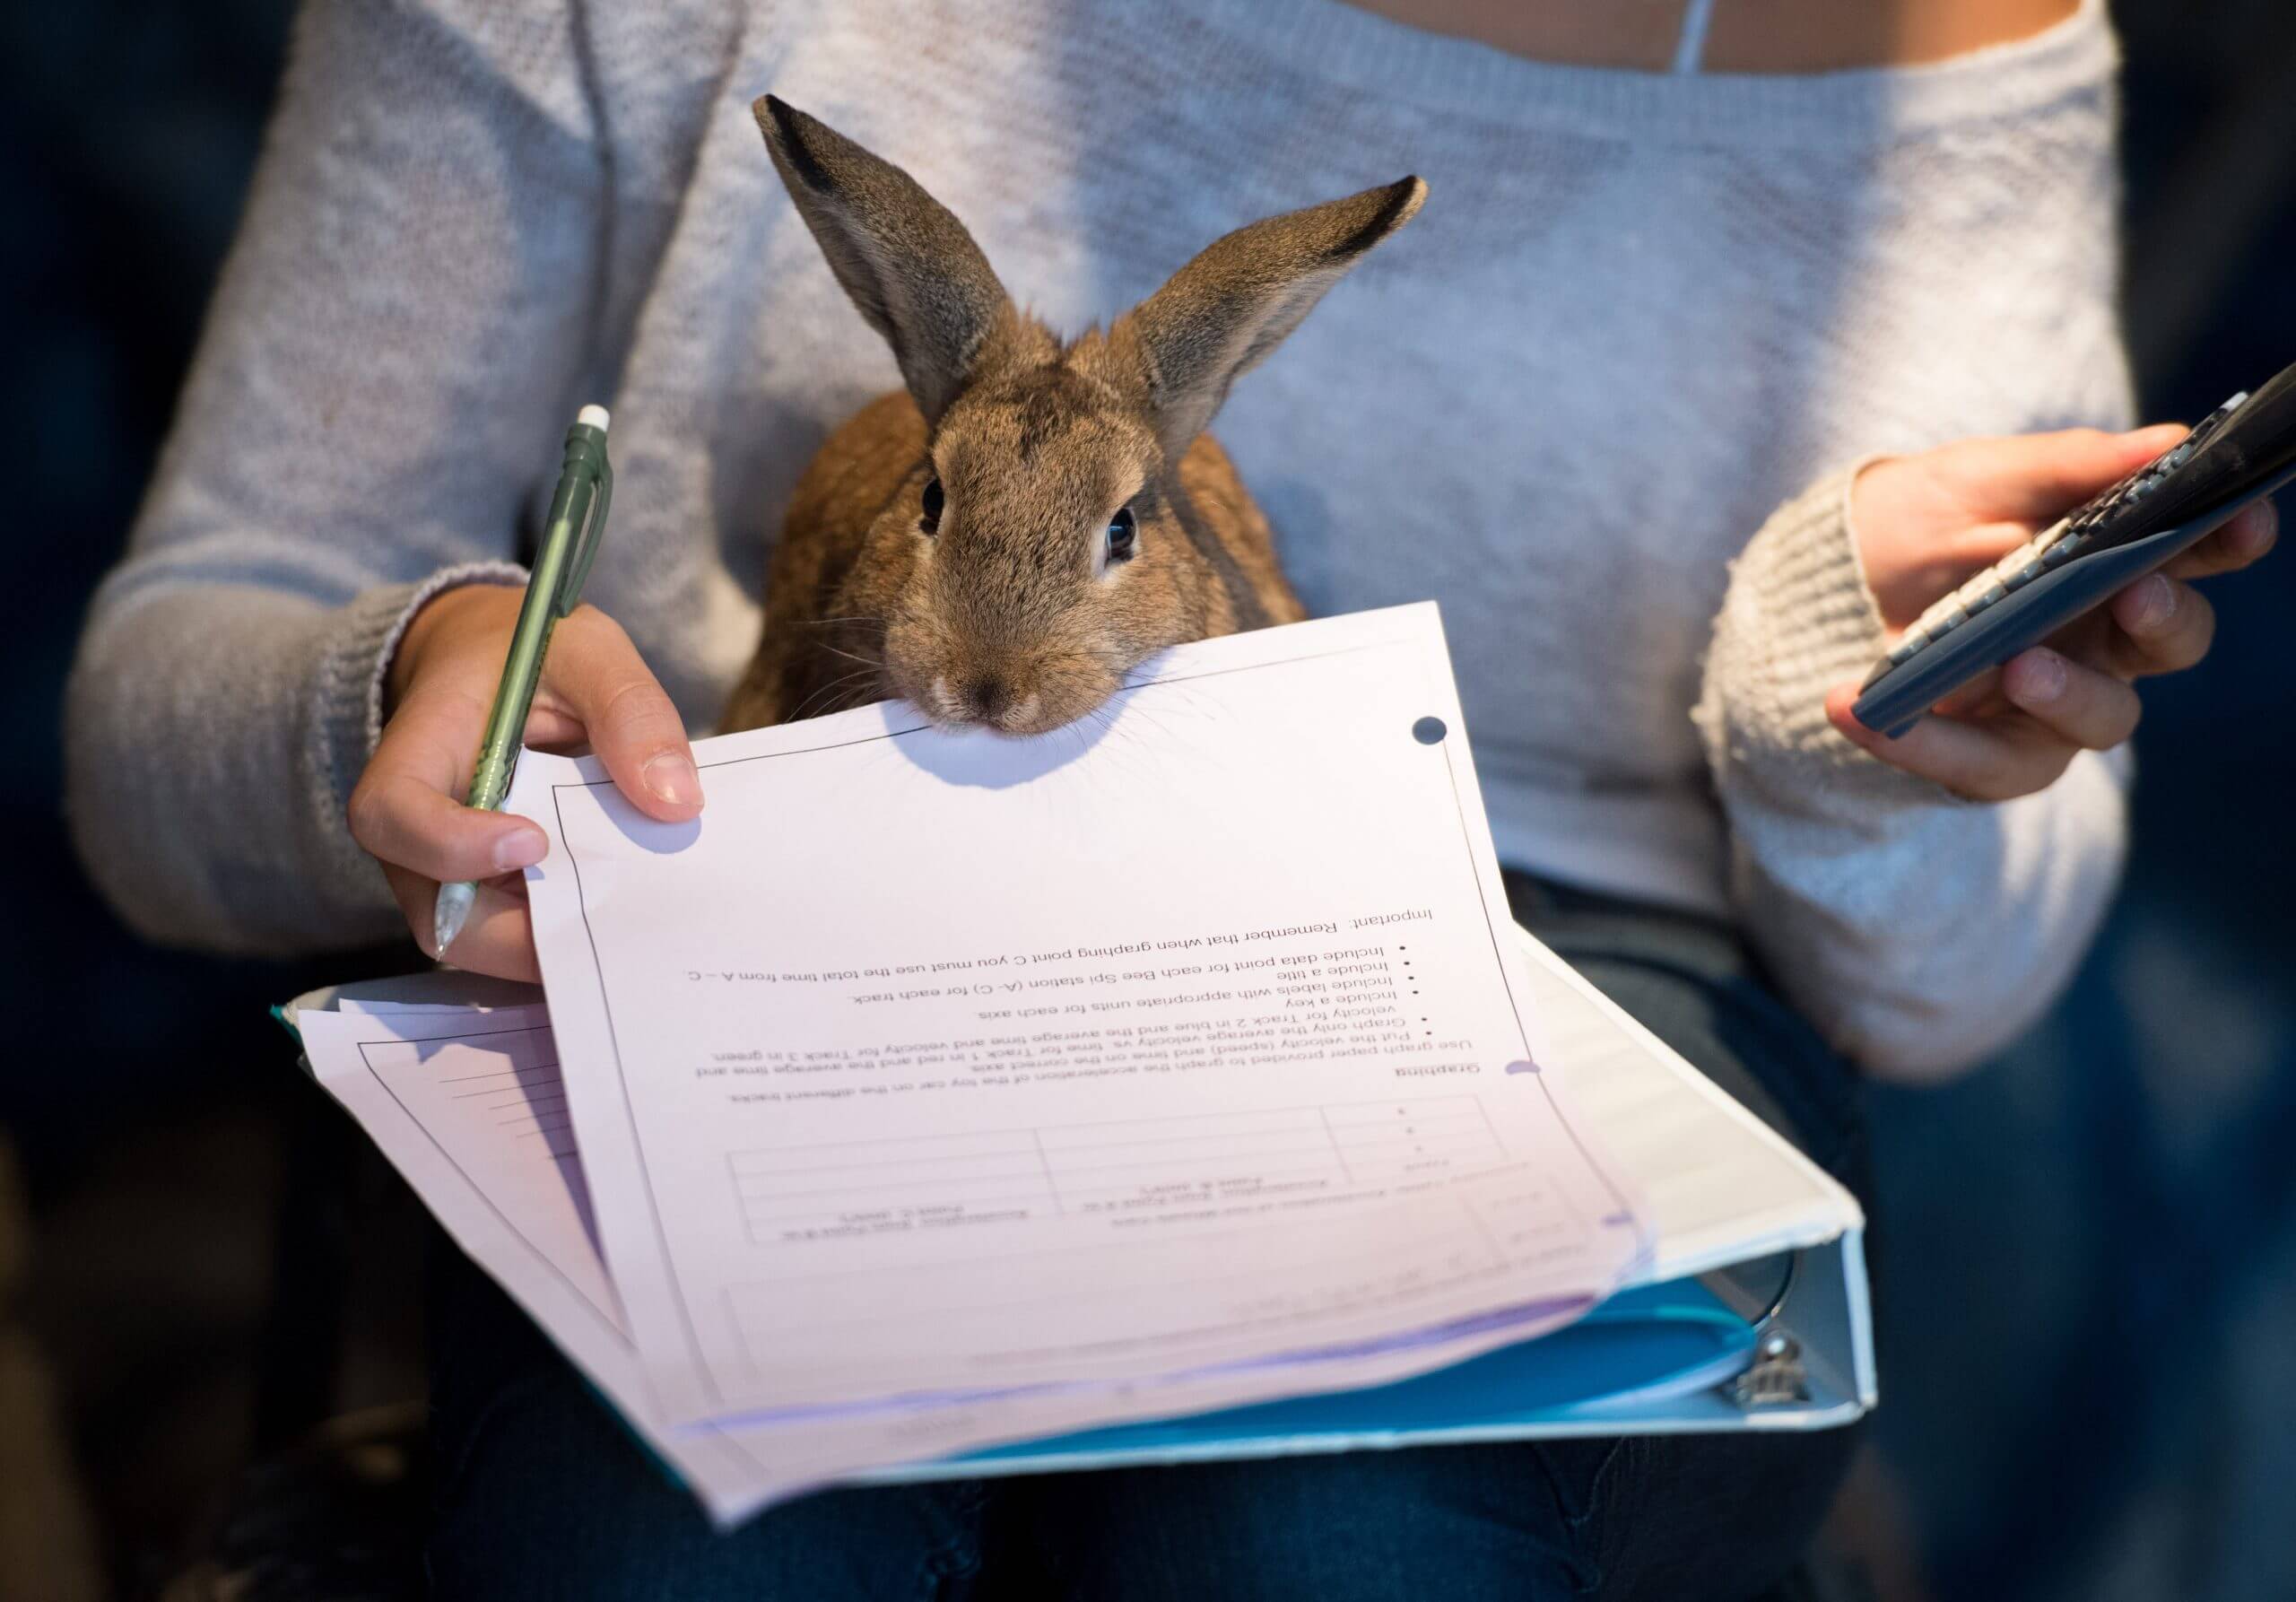 A rabbit sitting on a person's lap chews a paper. The person holds a calculator in one hand and grasps the paper and pencil in another.